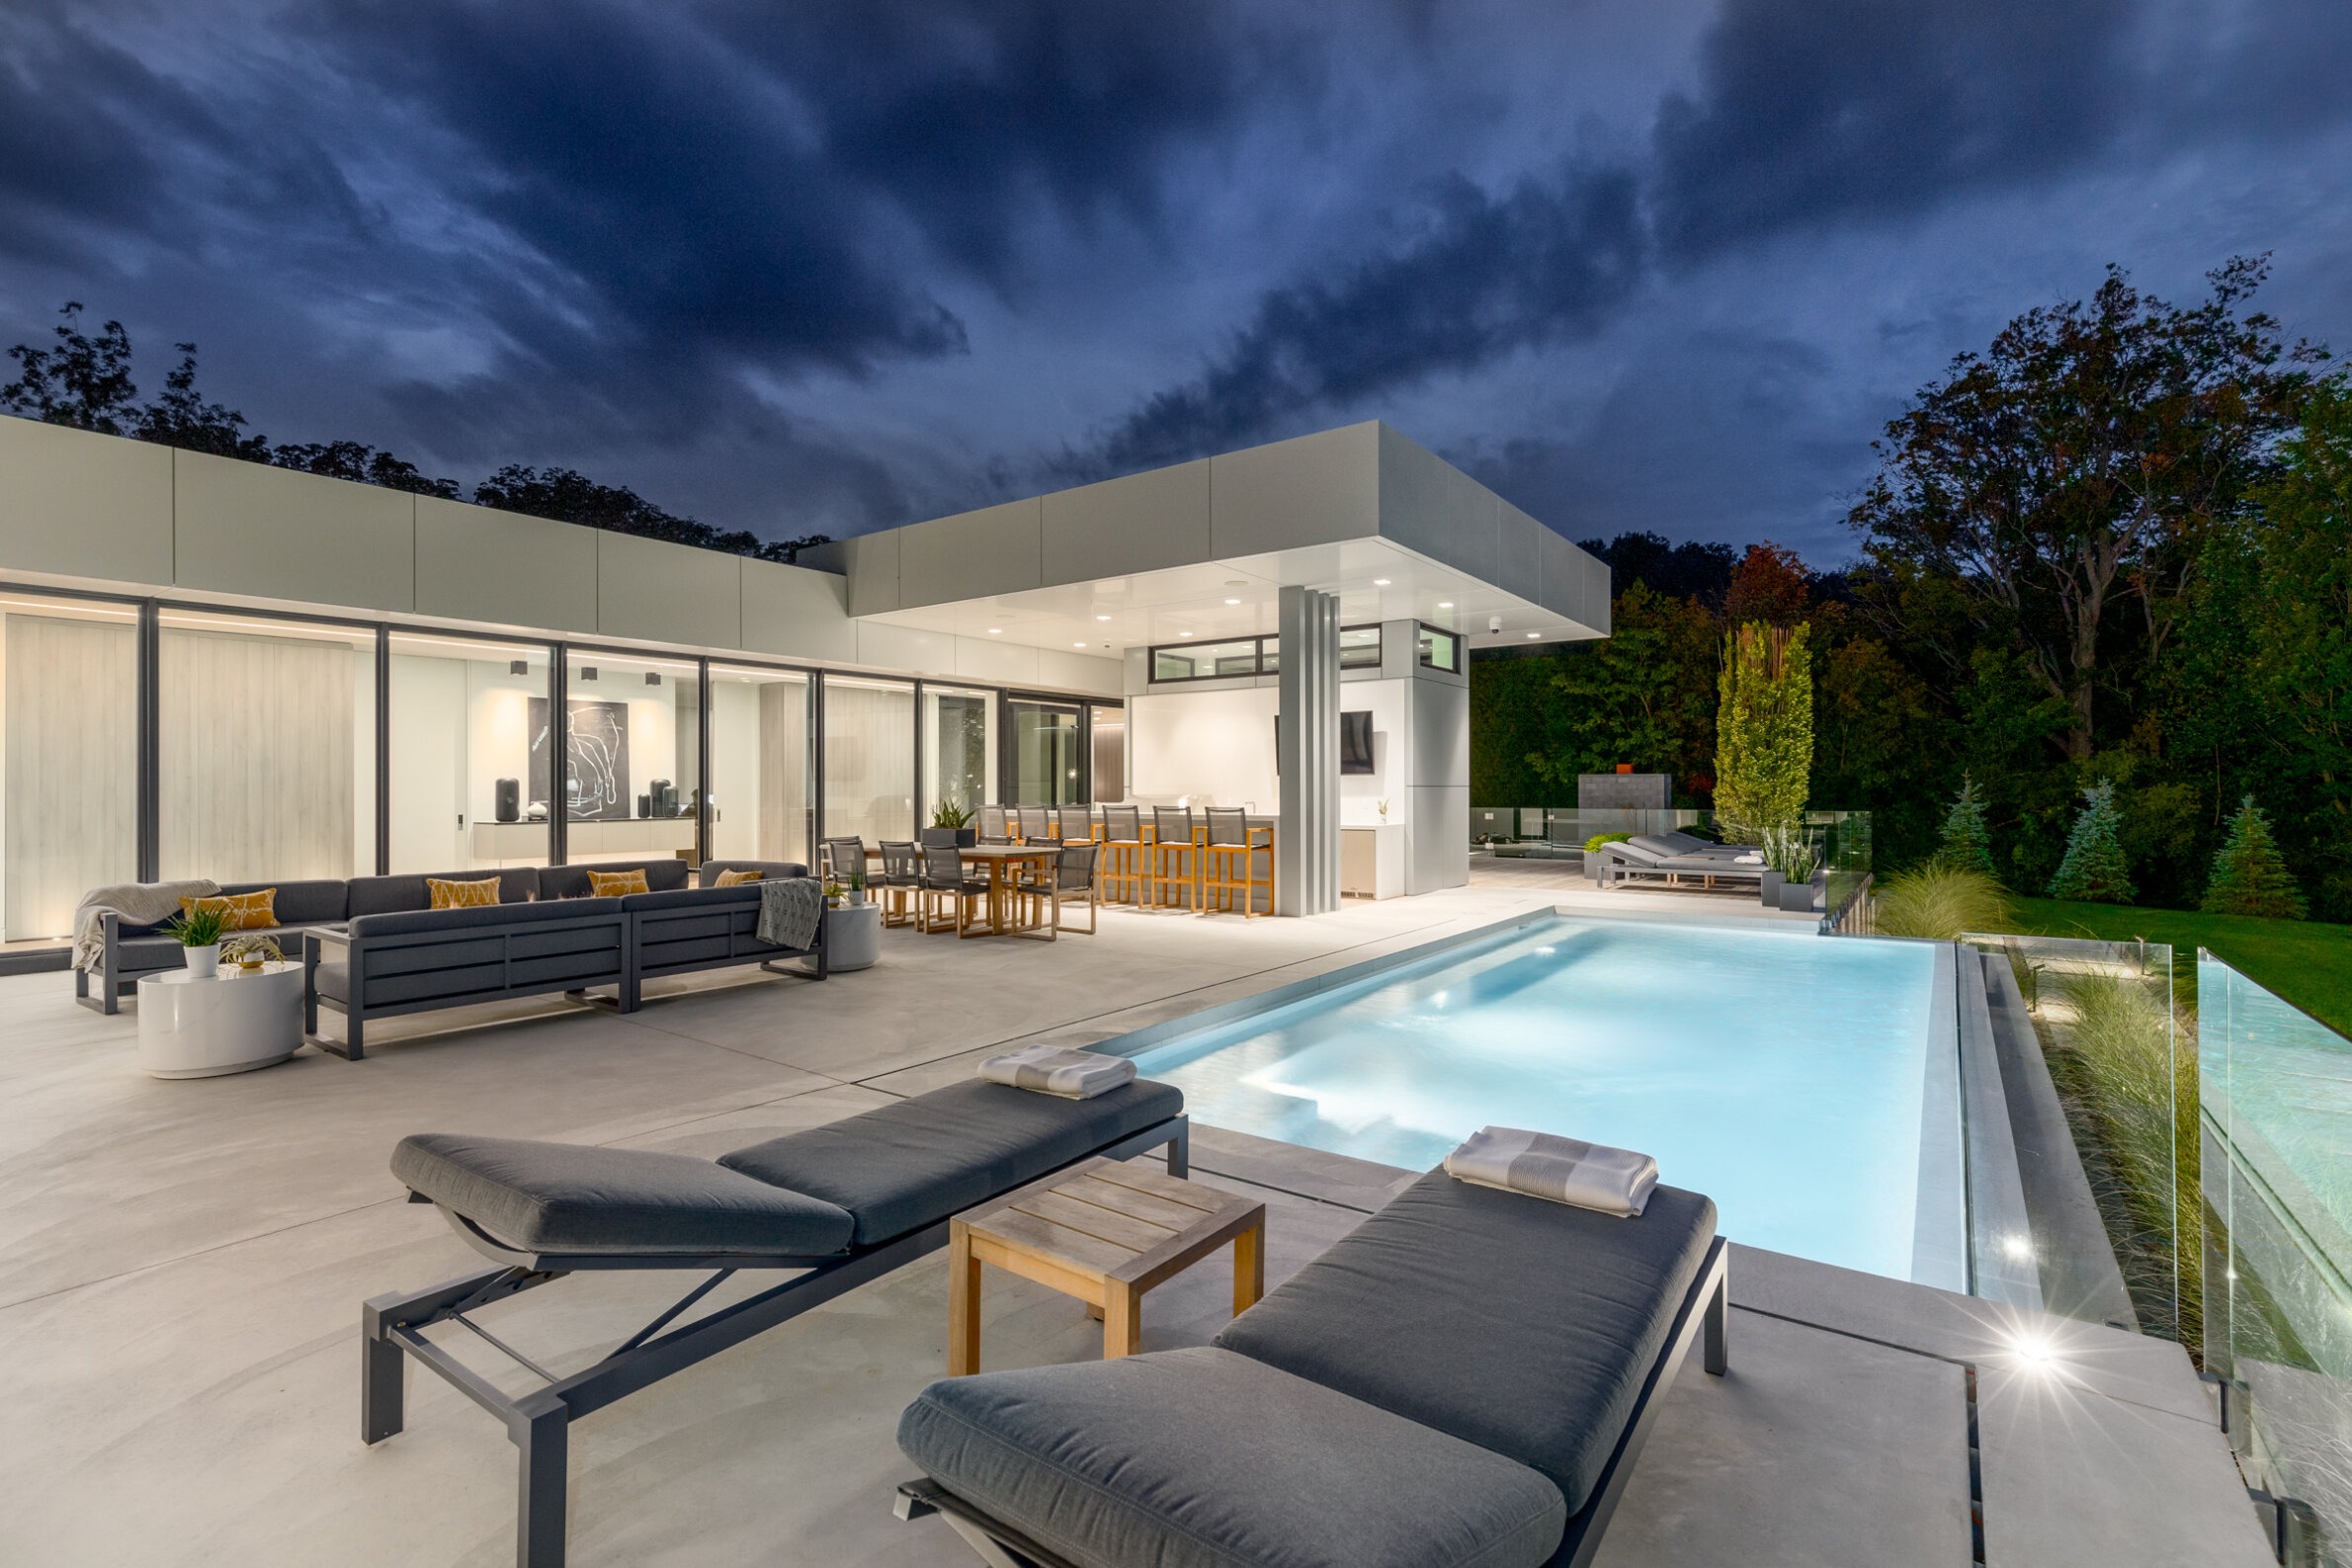 A modern house with large windows and an outdoor pool at dusk. Patio with loungers and an outdoor dining area, surrounded by trees under a dramatic sky.